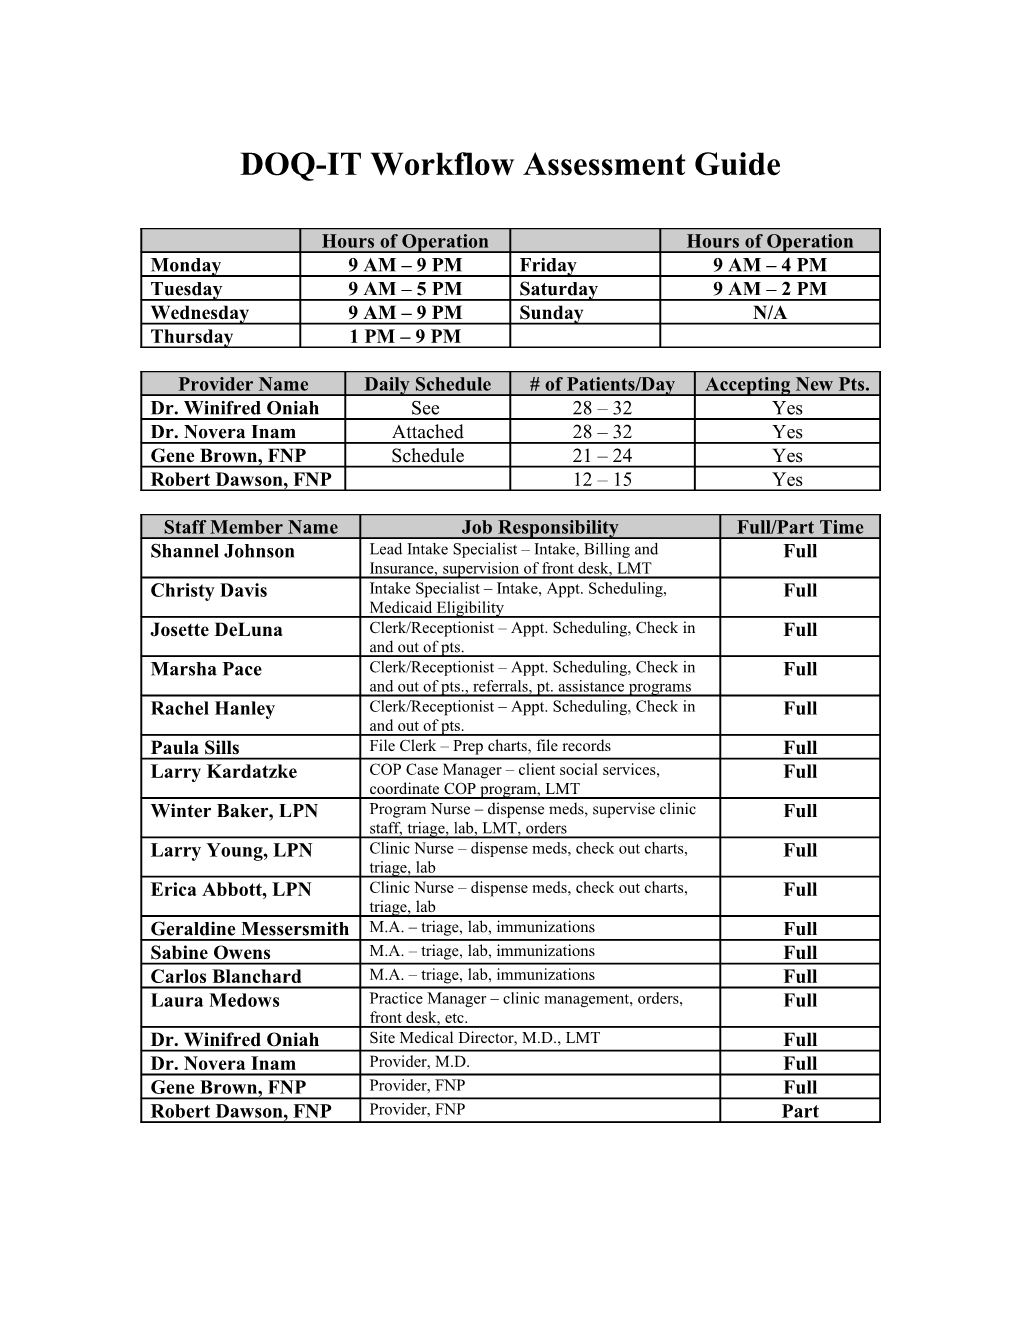 DOQ-IT Workflow Assessment Guide